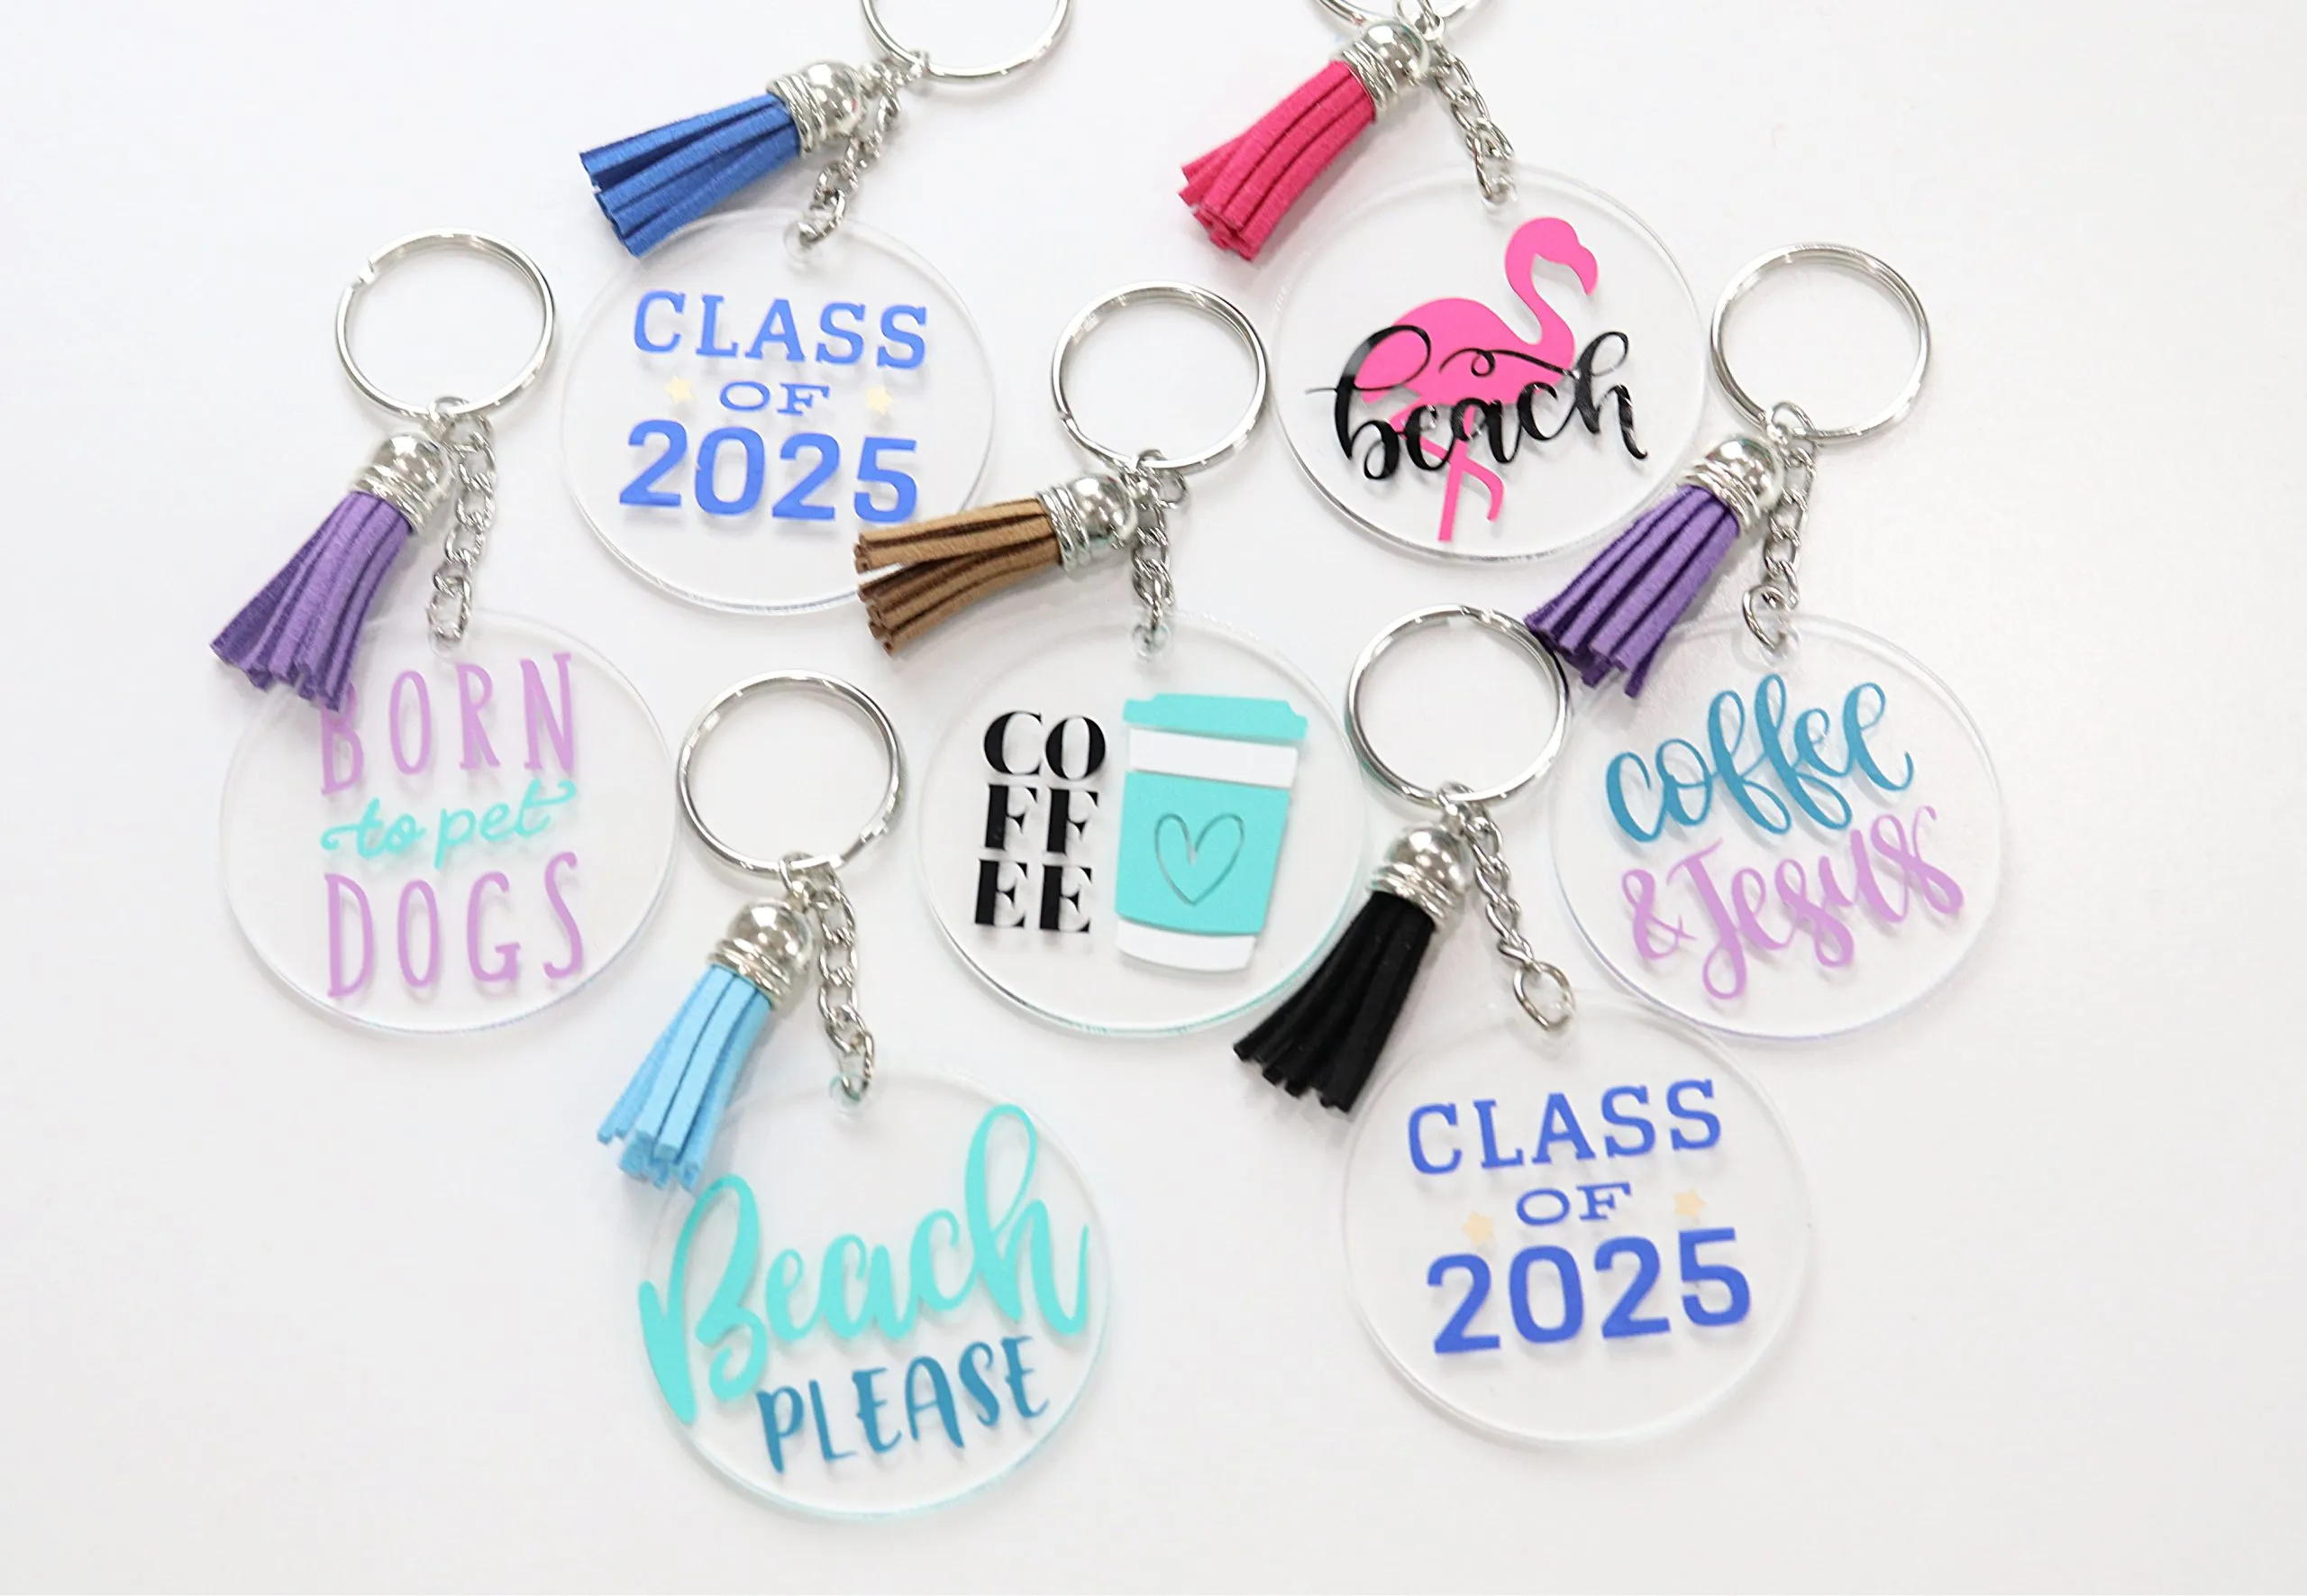 The Best DIY Kits for Making Your Own Acrylic Pins and Customized Keychains